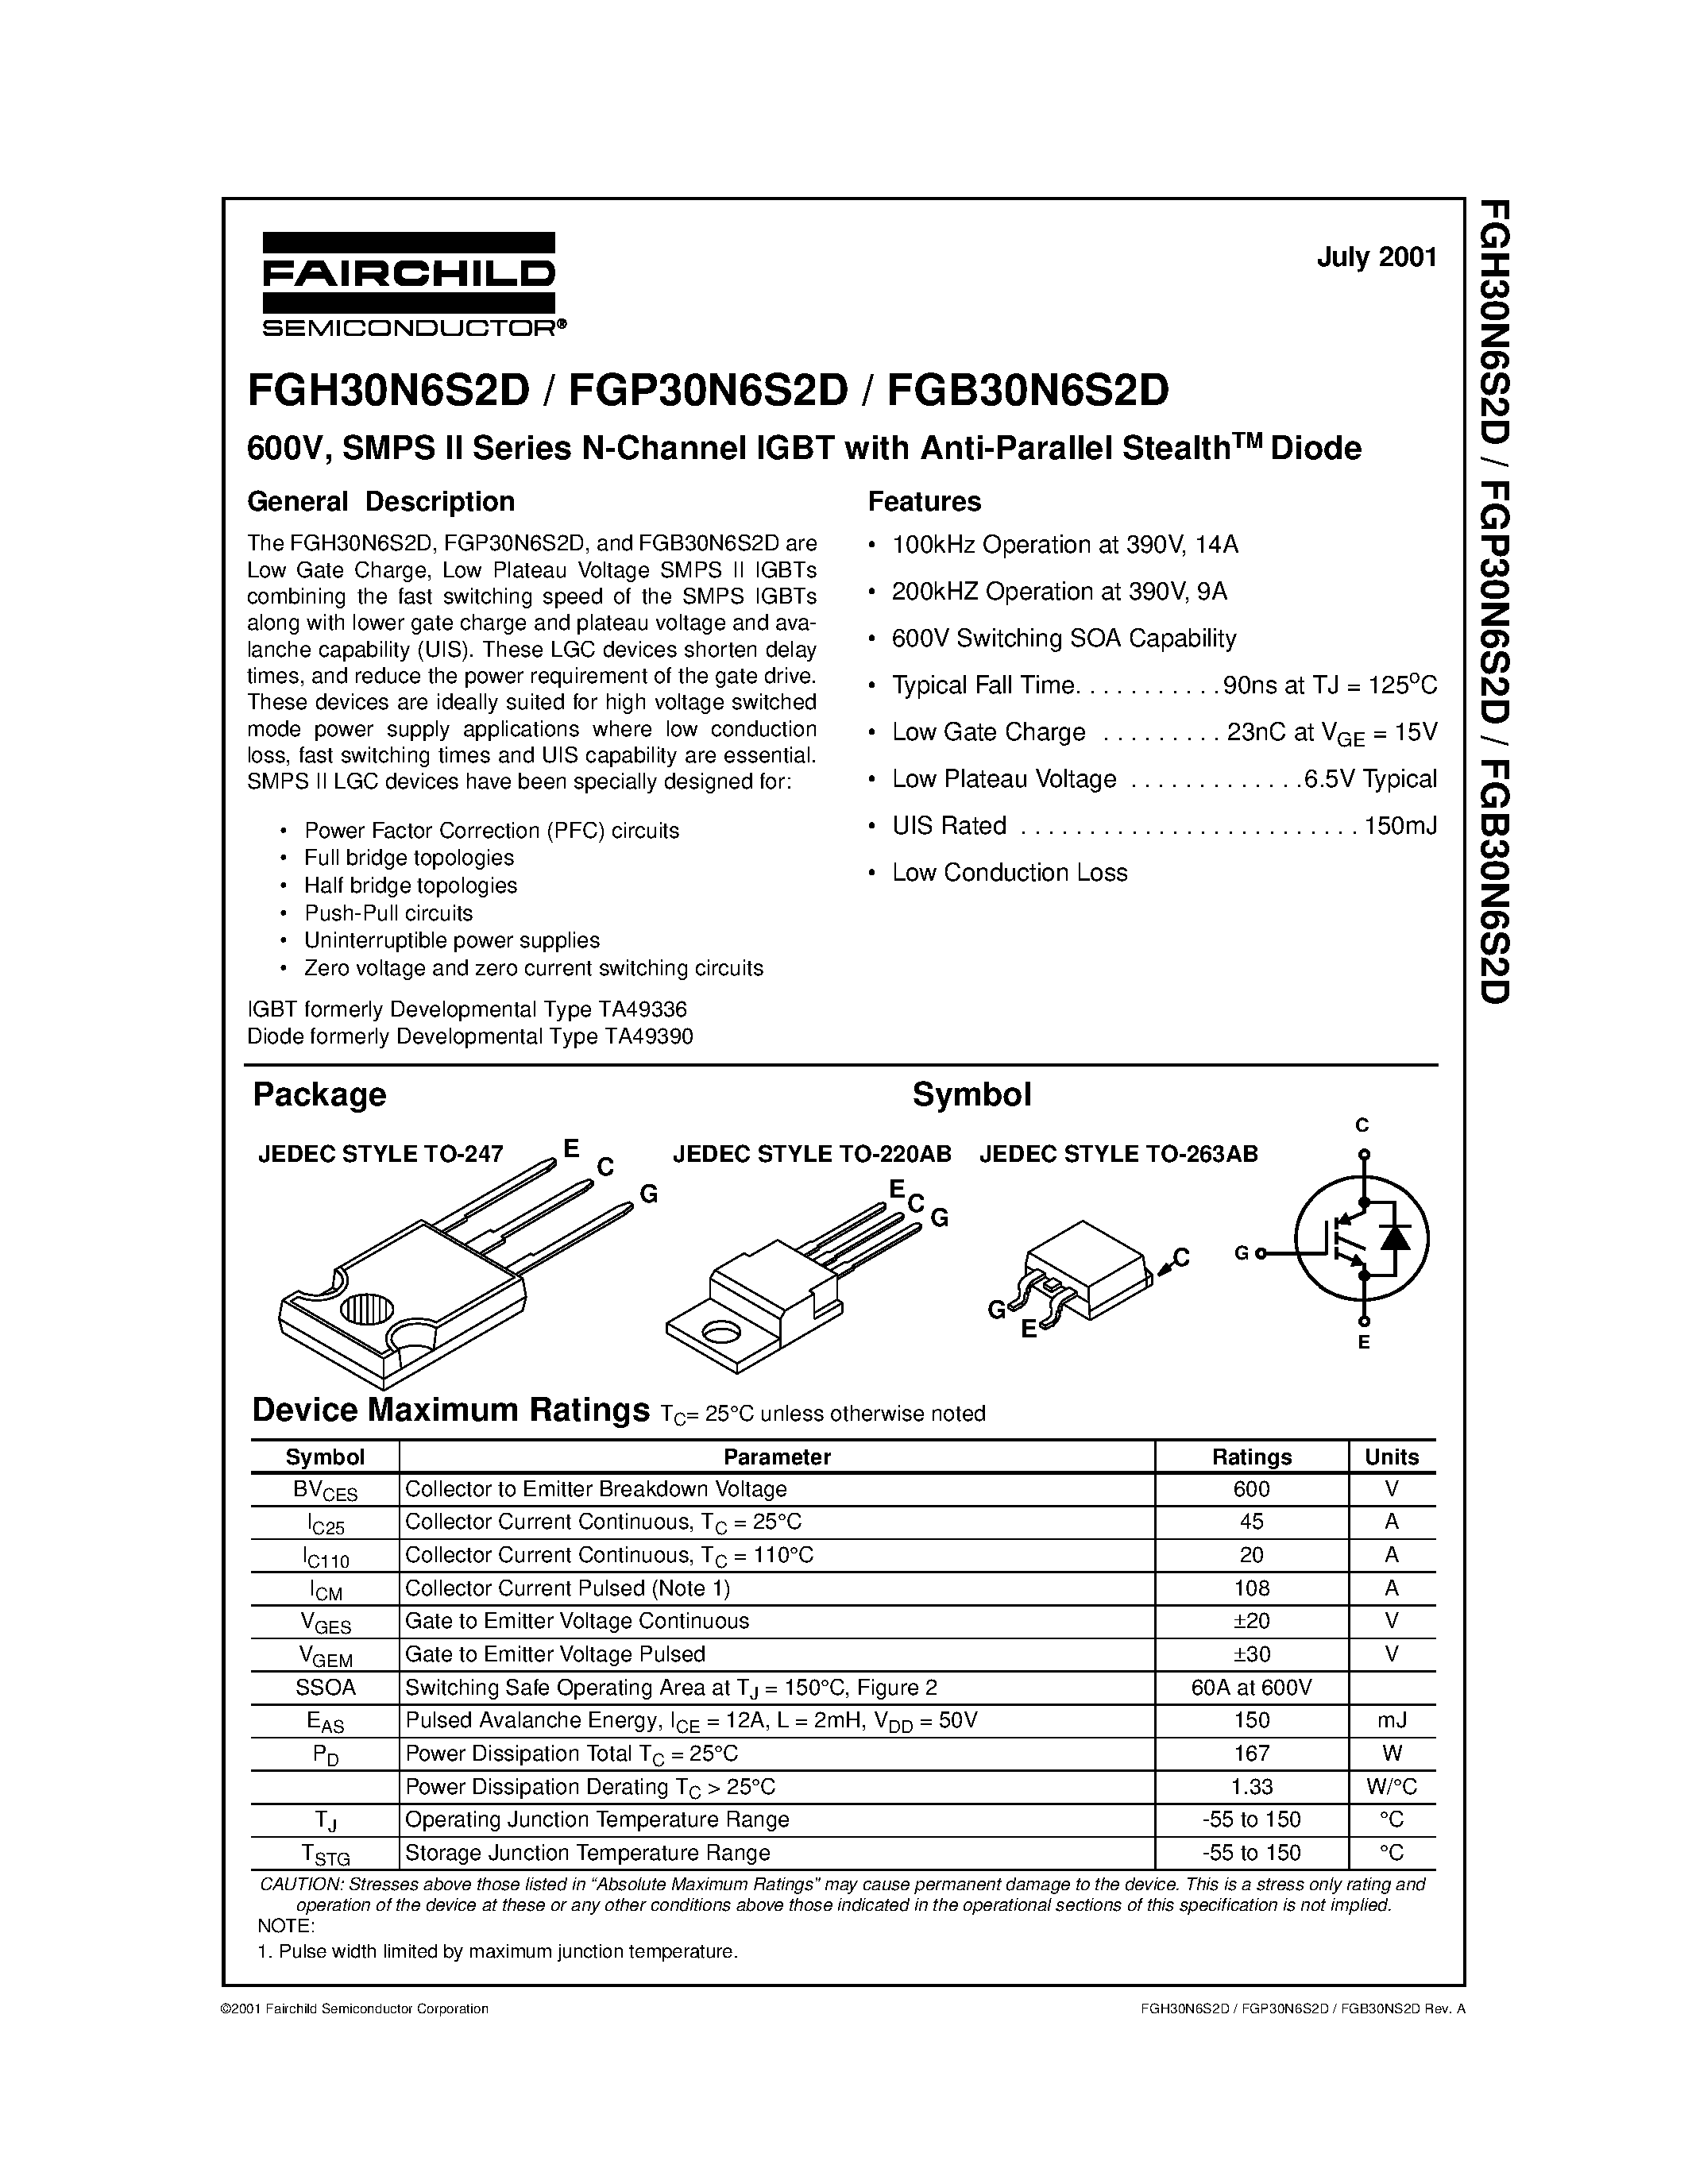 Datasheet FGB30N6S2D - 600V/ SMPS II Series N-Channel IGBT with Anti-Parallel StealthTM Diode page 1